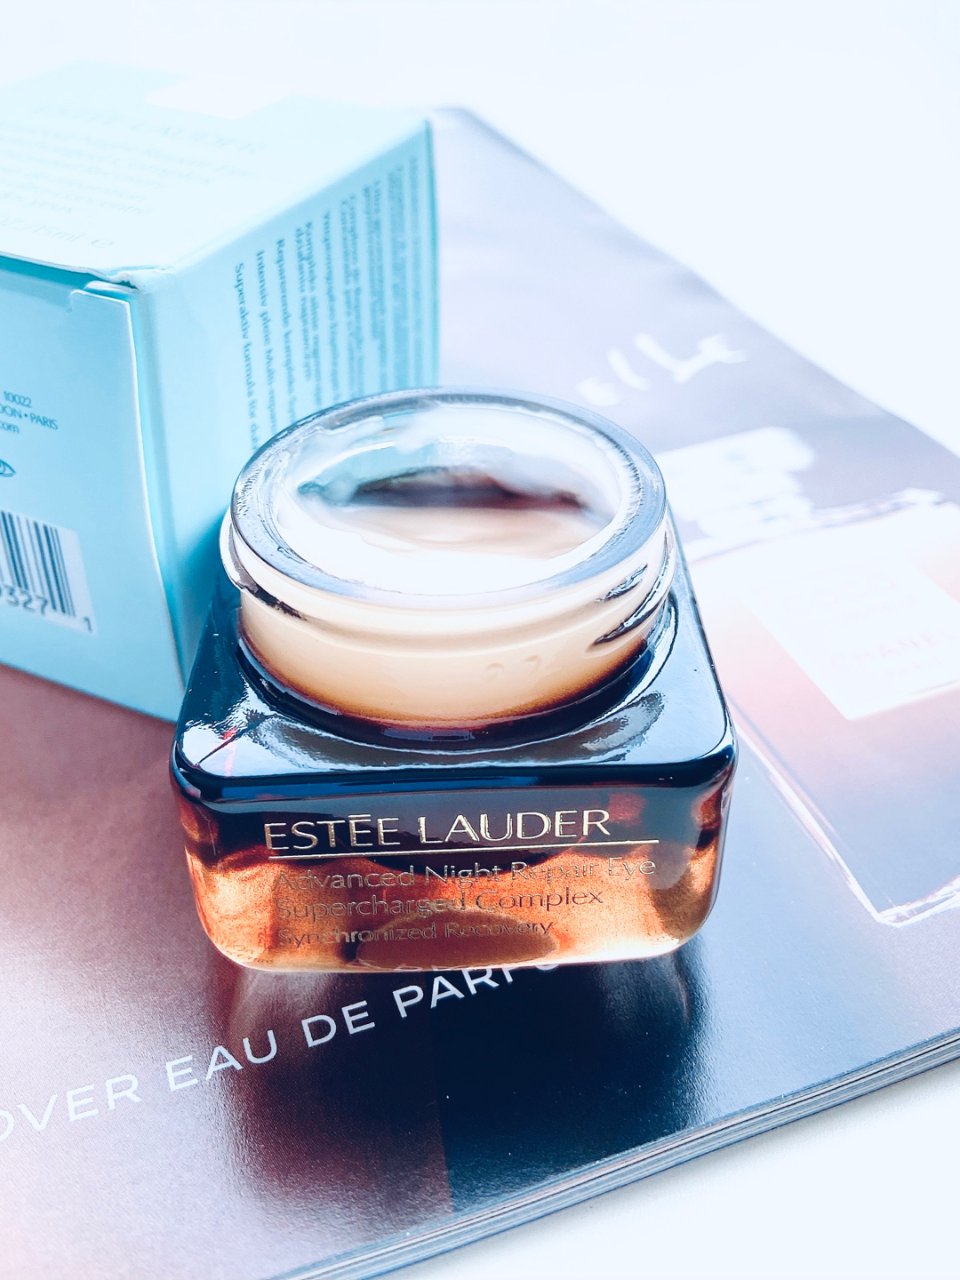 Advanced Night Repair Eye Supercharged Complex Synchronized Recovery | Estée Lauder Official Site